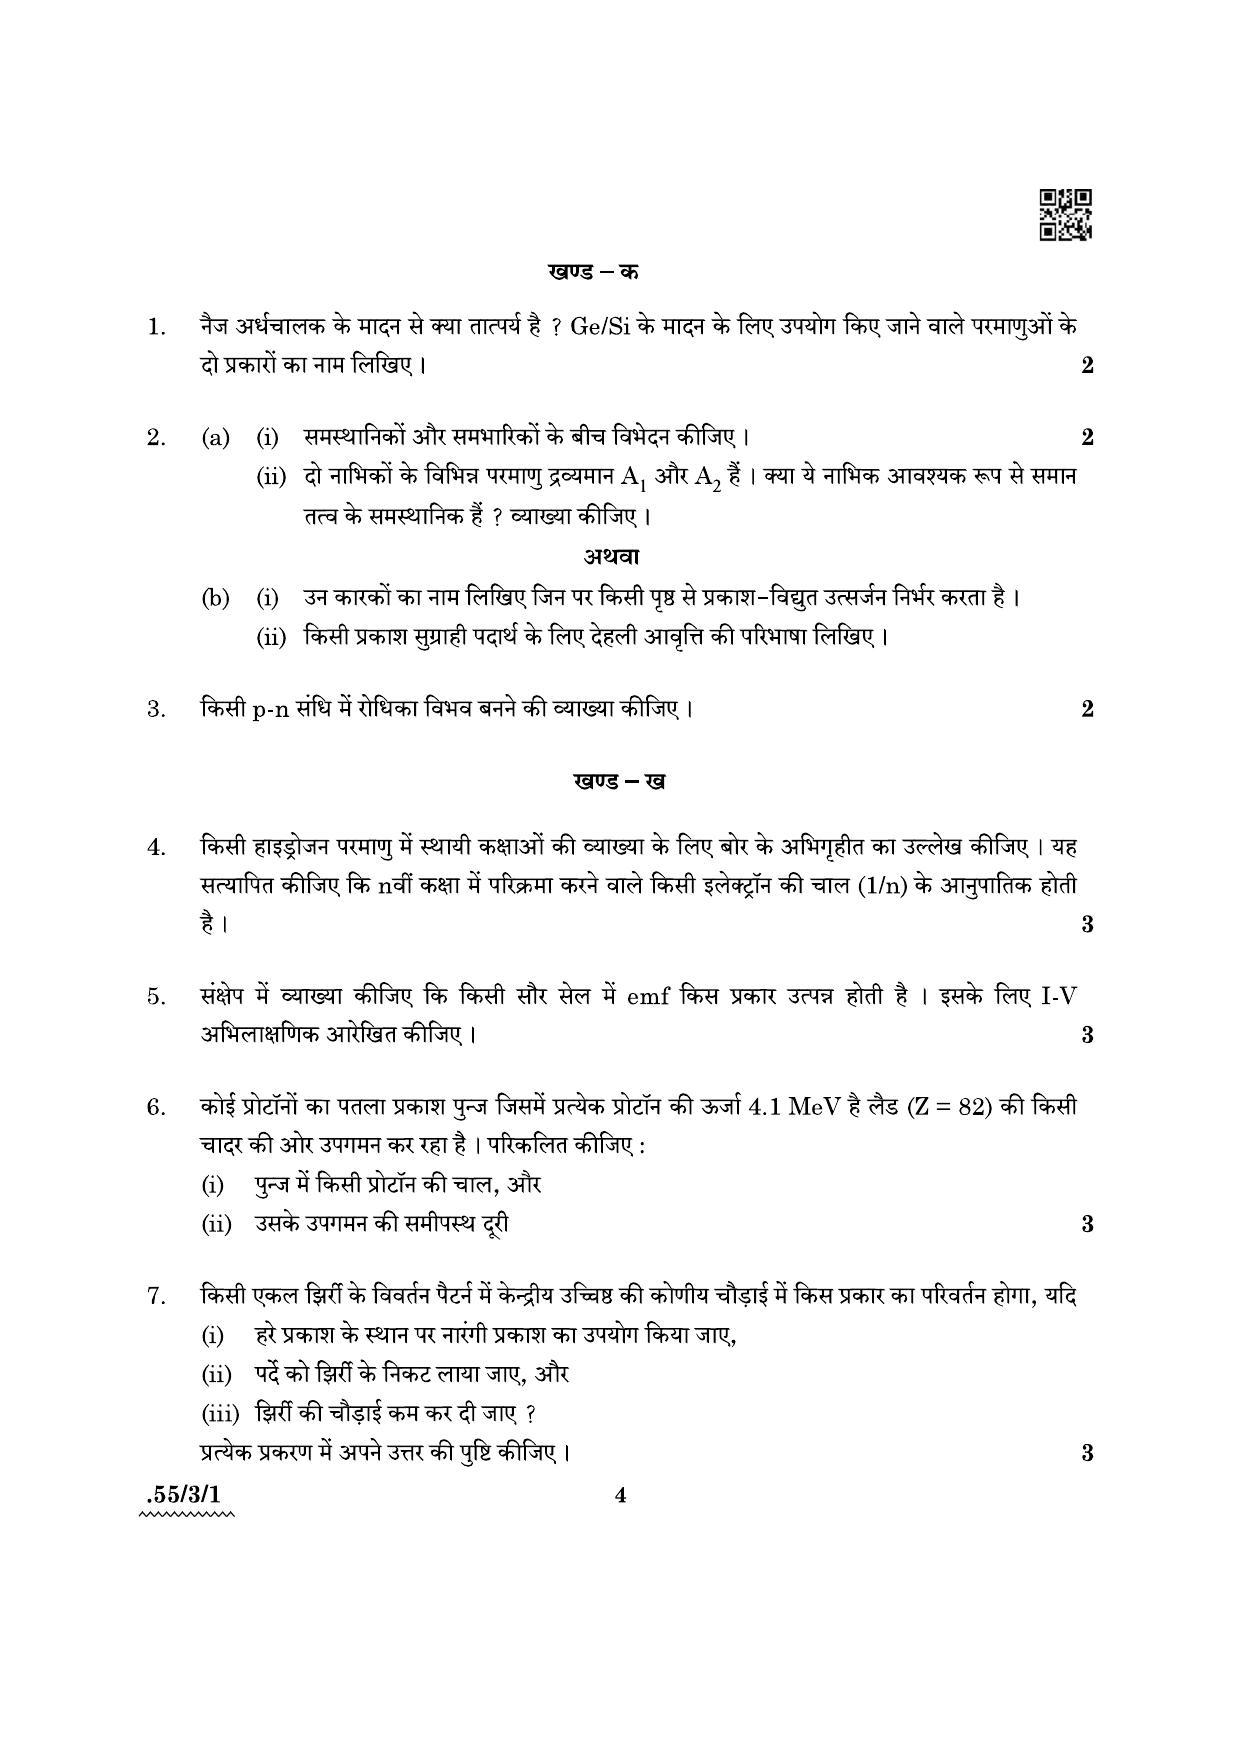 CBSE Class 12 55-3-1 Physics 2022 Question Paper - Page 4